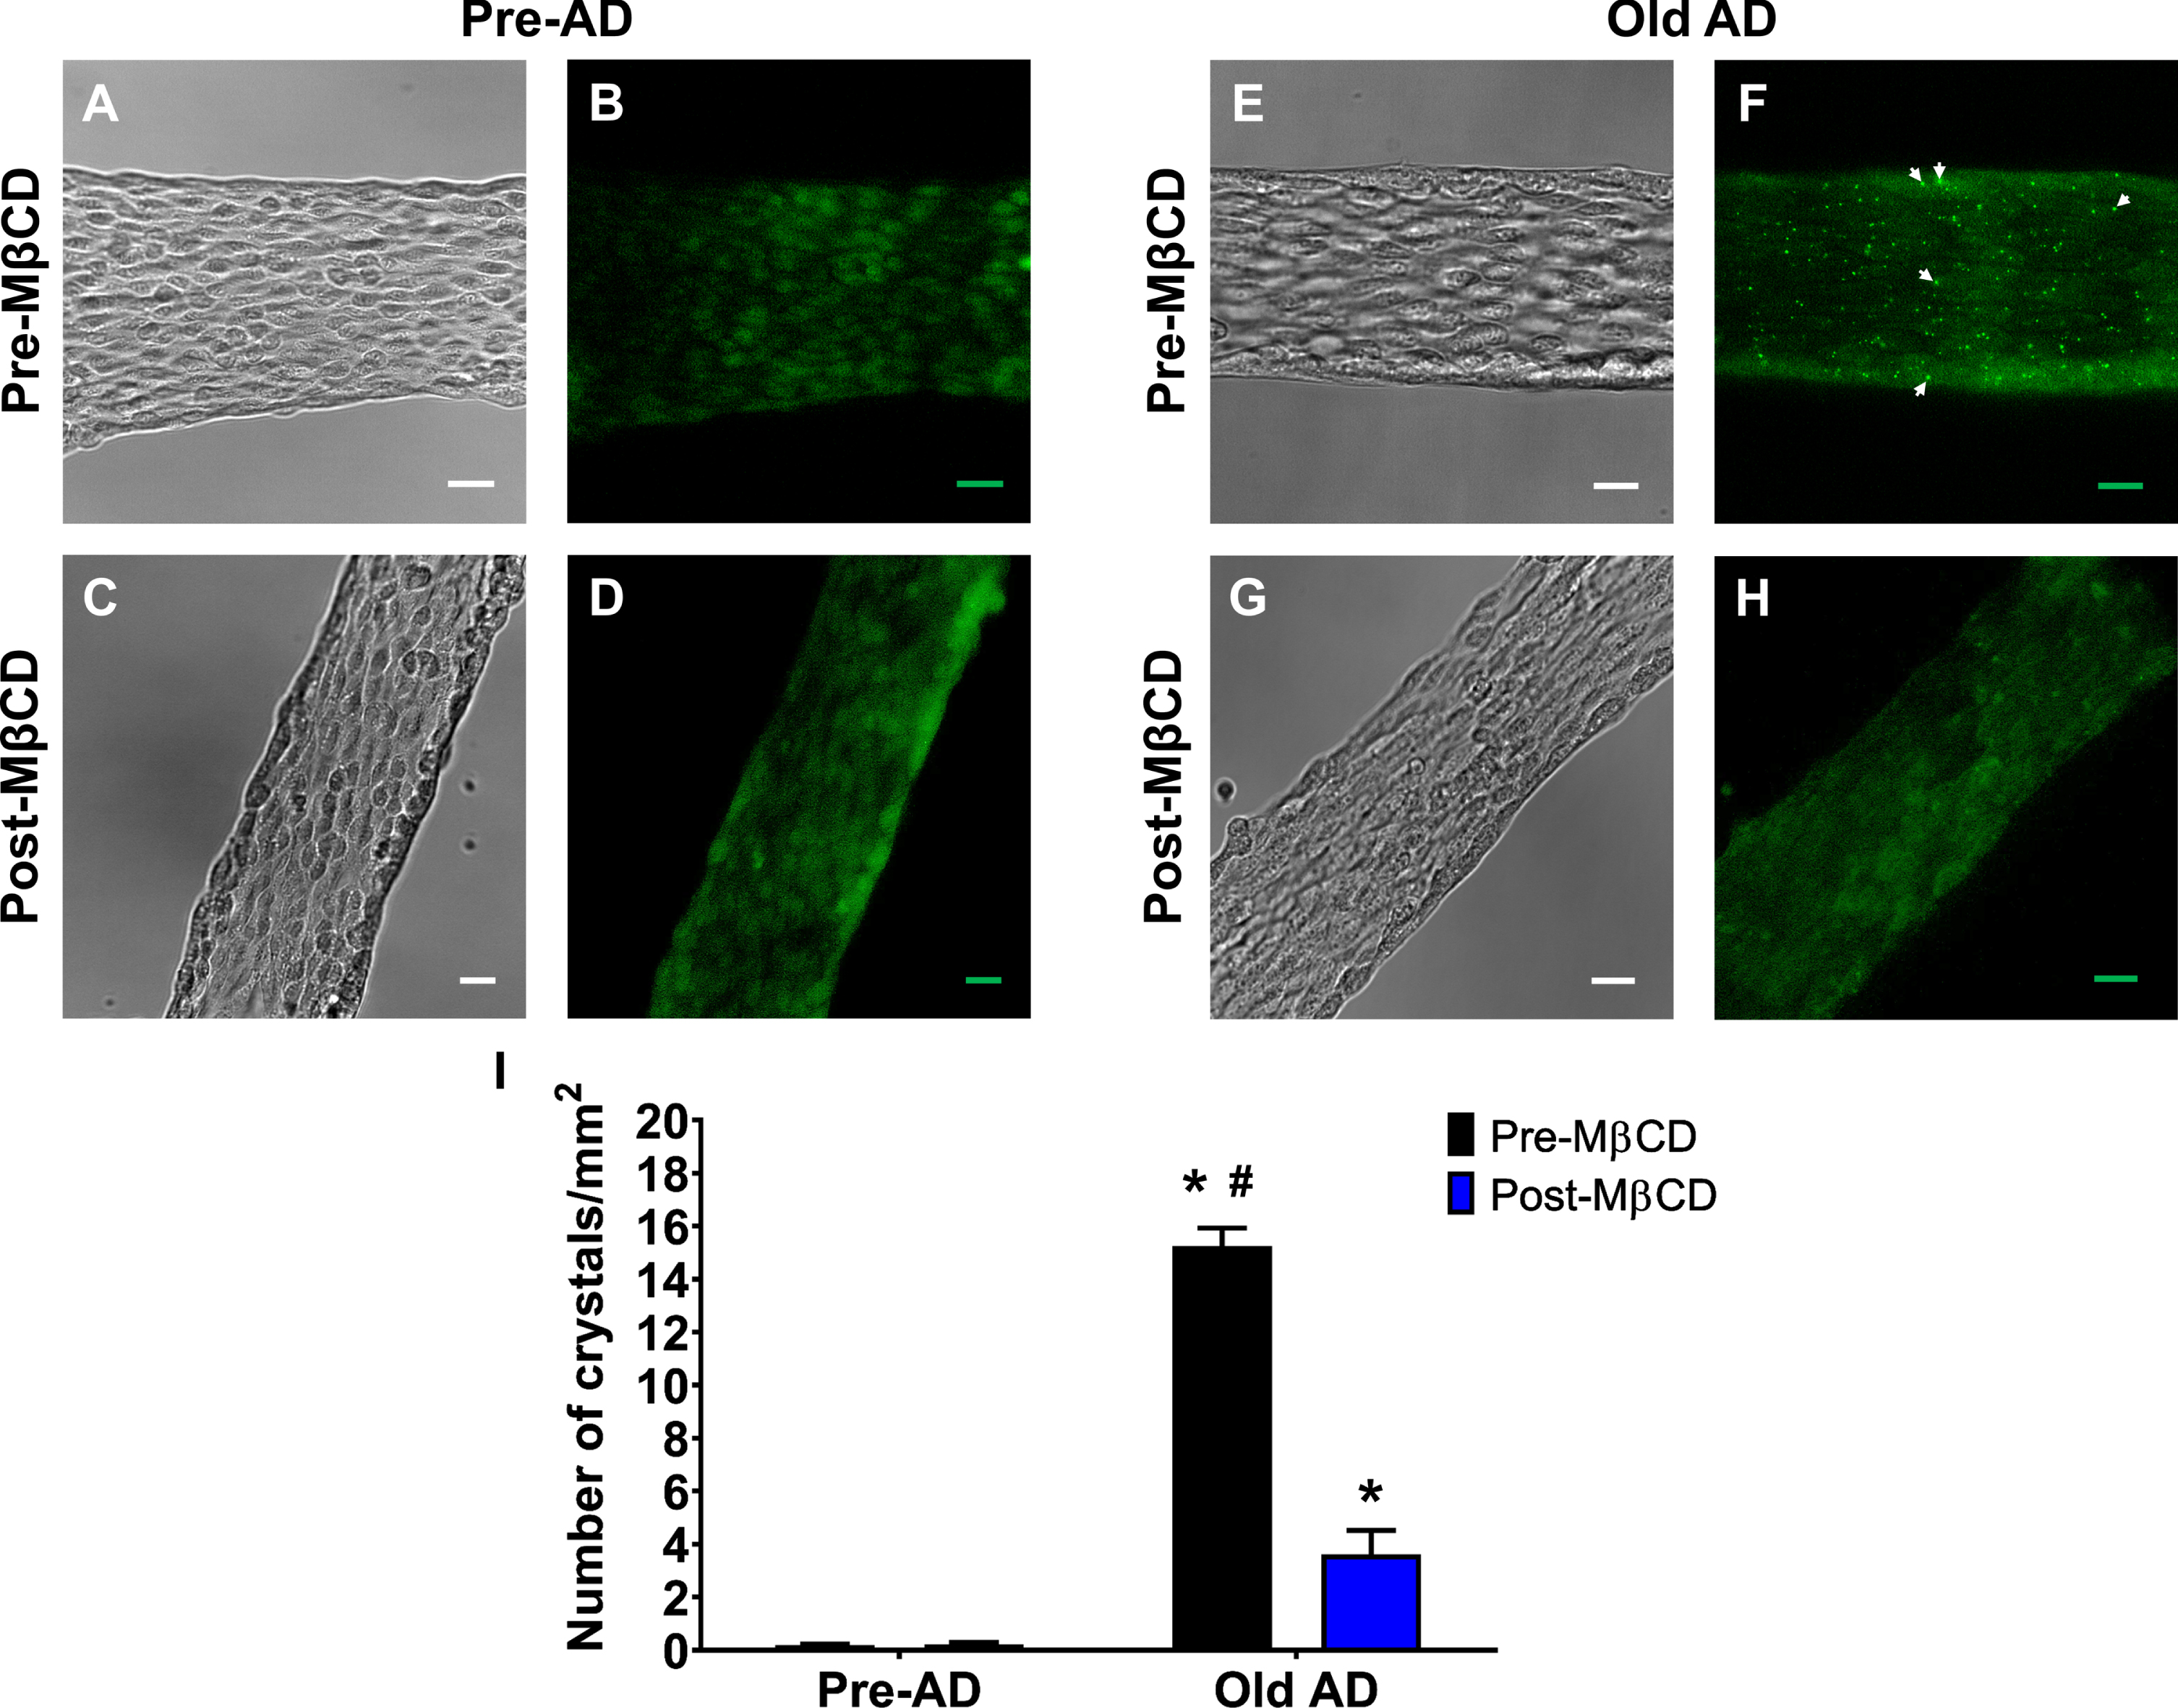 Presence of cholesterol crystals in AD animals and reduction following MβCD treatment. Representative (A, C, E, G) brightfield and (B, D, F, H) Filipin-III images (green pseudo-color) of cerebrovascular endothelial cell tubes isolated from female animals. A, B) Pre-AD images without MβCD treatment. C, D) As shown in (A) & (B) respectively after MβCD treatment (1 mmol/L, 20 min incubation, & 1 h wash). E-H) As shown in (A), (B), (C), and (D) respectively for AD animals. White arrows indicate cholesterol “crystals” in endothelial tubes during AD conditions in the absence of MβCD treatment. The scale bar throughout panels represents 20μm. I) Summary data for number of crystals per unit area (mm2). n = number of animals and respective cerebral endothelial tubes (Pre-AD & Old AD: 4; Pre-AD & Old AD after MβCD: 3). *p < 0.05 (two-way ANOVA & paired t-test), Pre-AD or Old AD female Post-MβCD versus respective Pre-MβCD group; #p < 0.05 (two-way ANOVA & paired t-test), Old AD female Pre-MβCD versus Old AD female Post-MβCD.